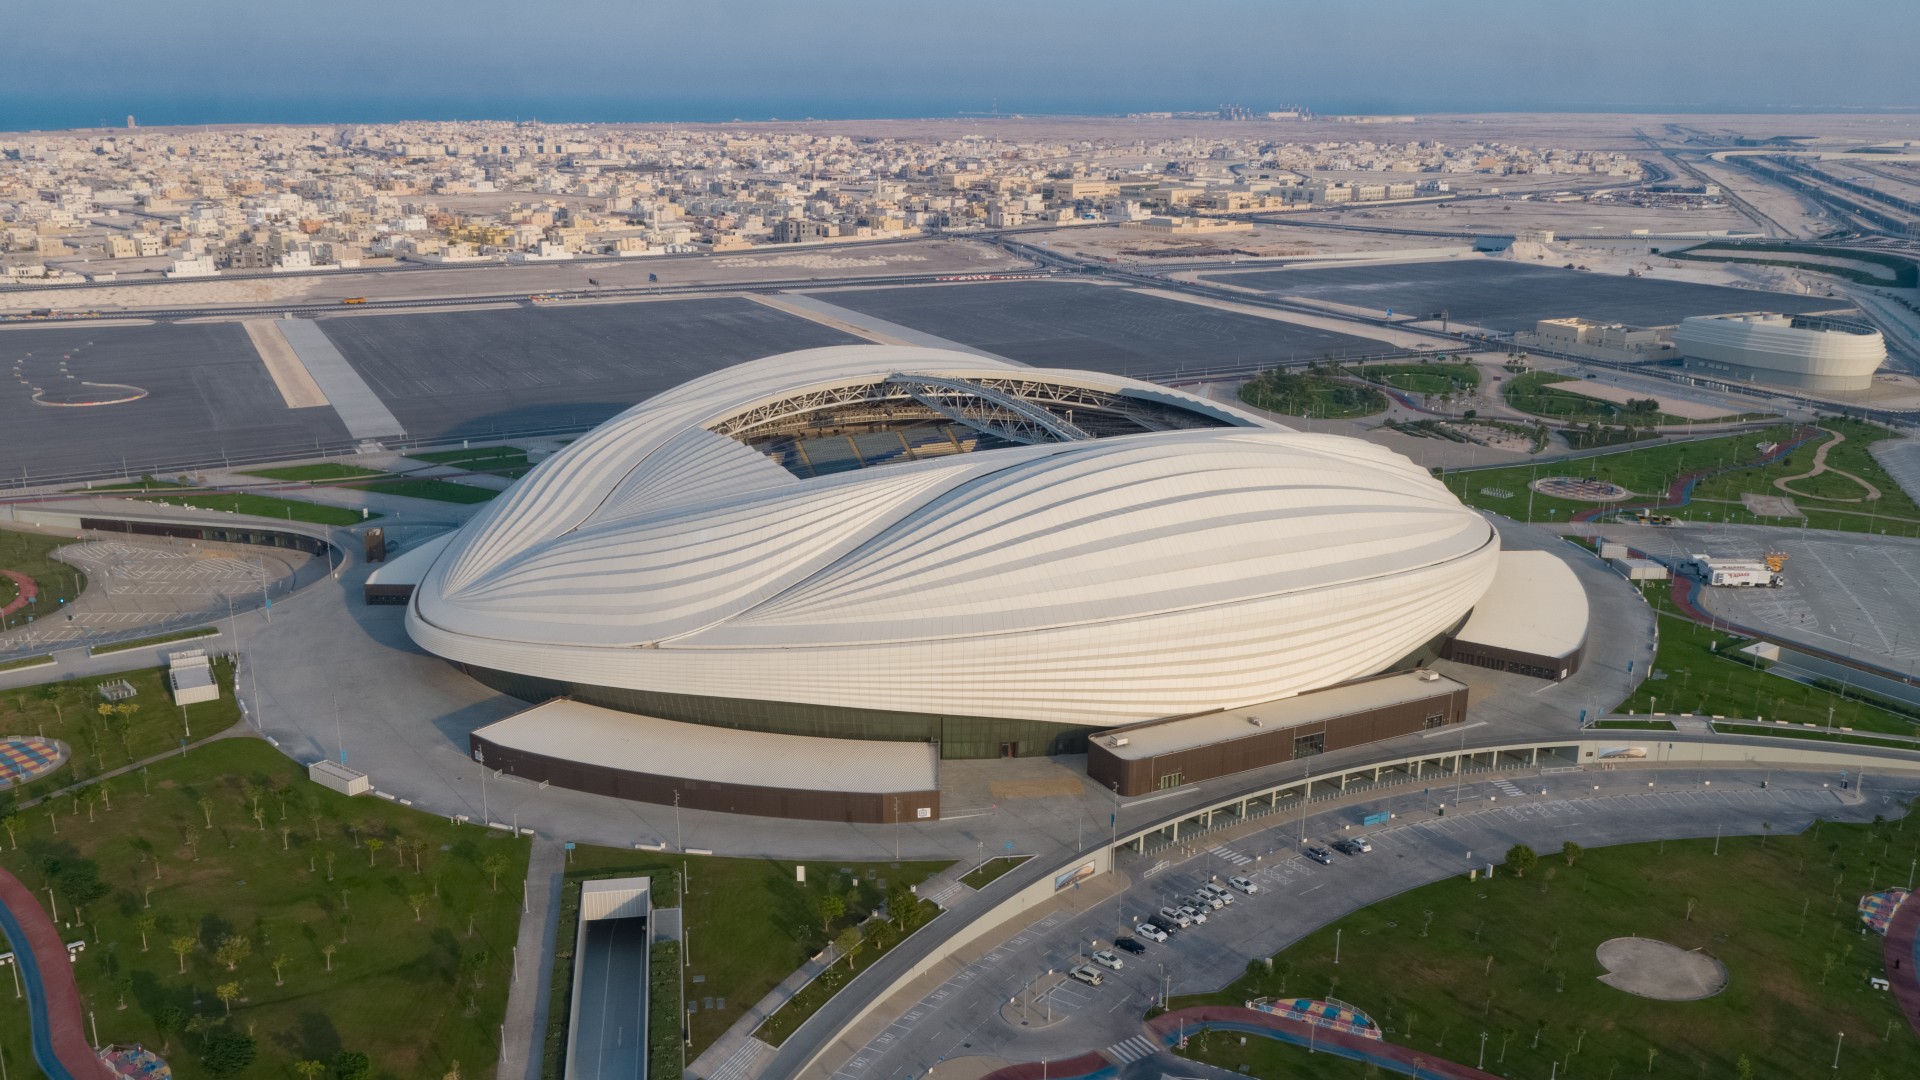 City Life Org - Final match schedule for the FIFA World Cup Qatar 2022™ now  available